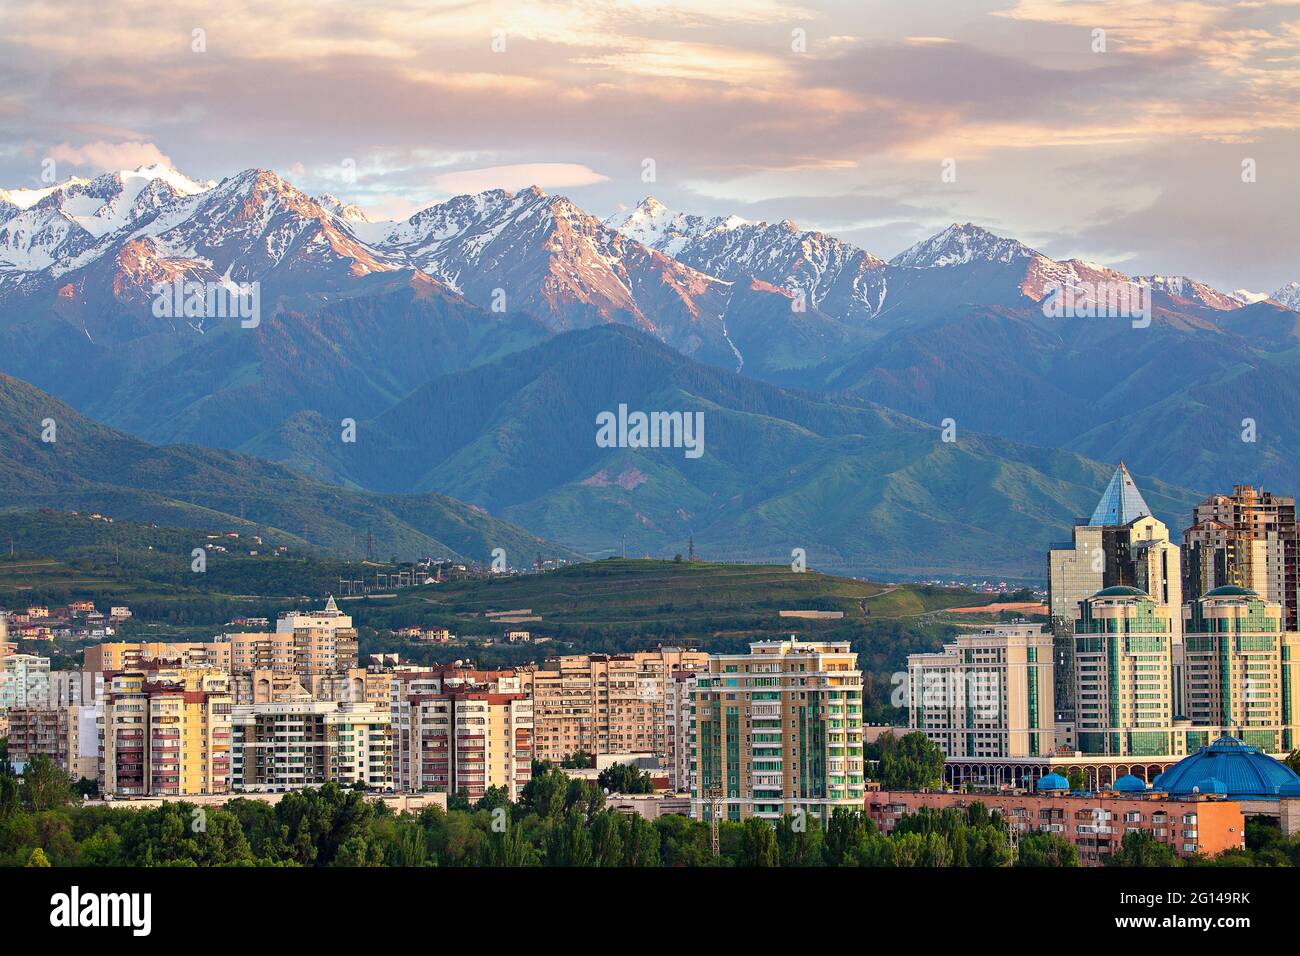 View over Almaty with snow capped mountains in the background, Almaty, Kazakhstan Stock Photo